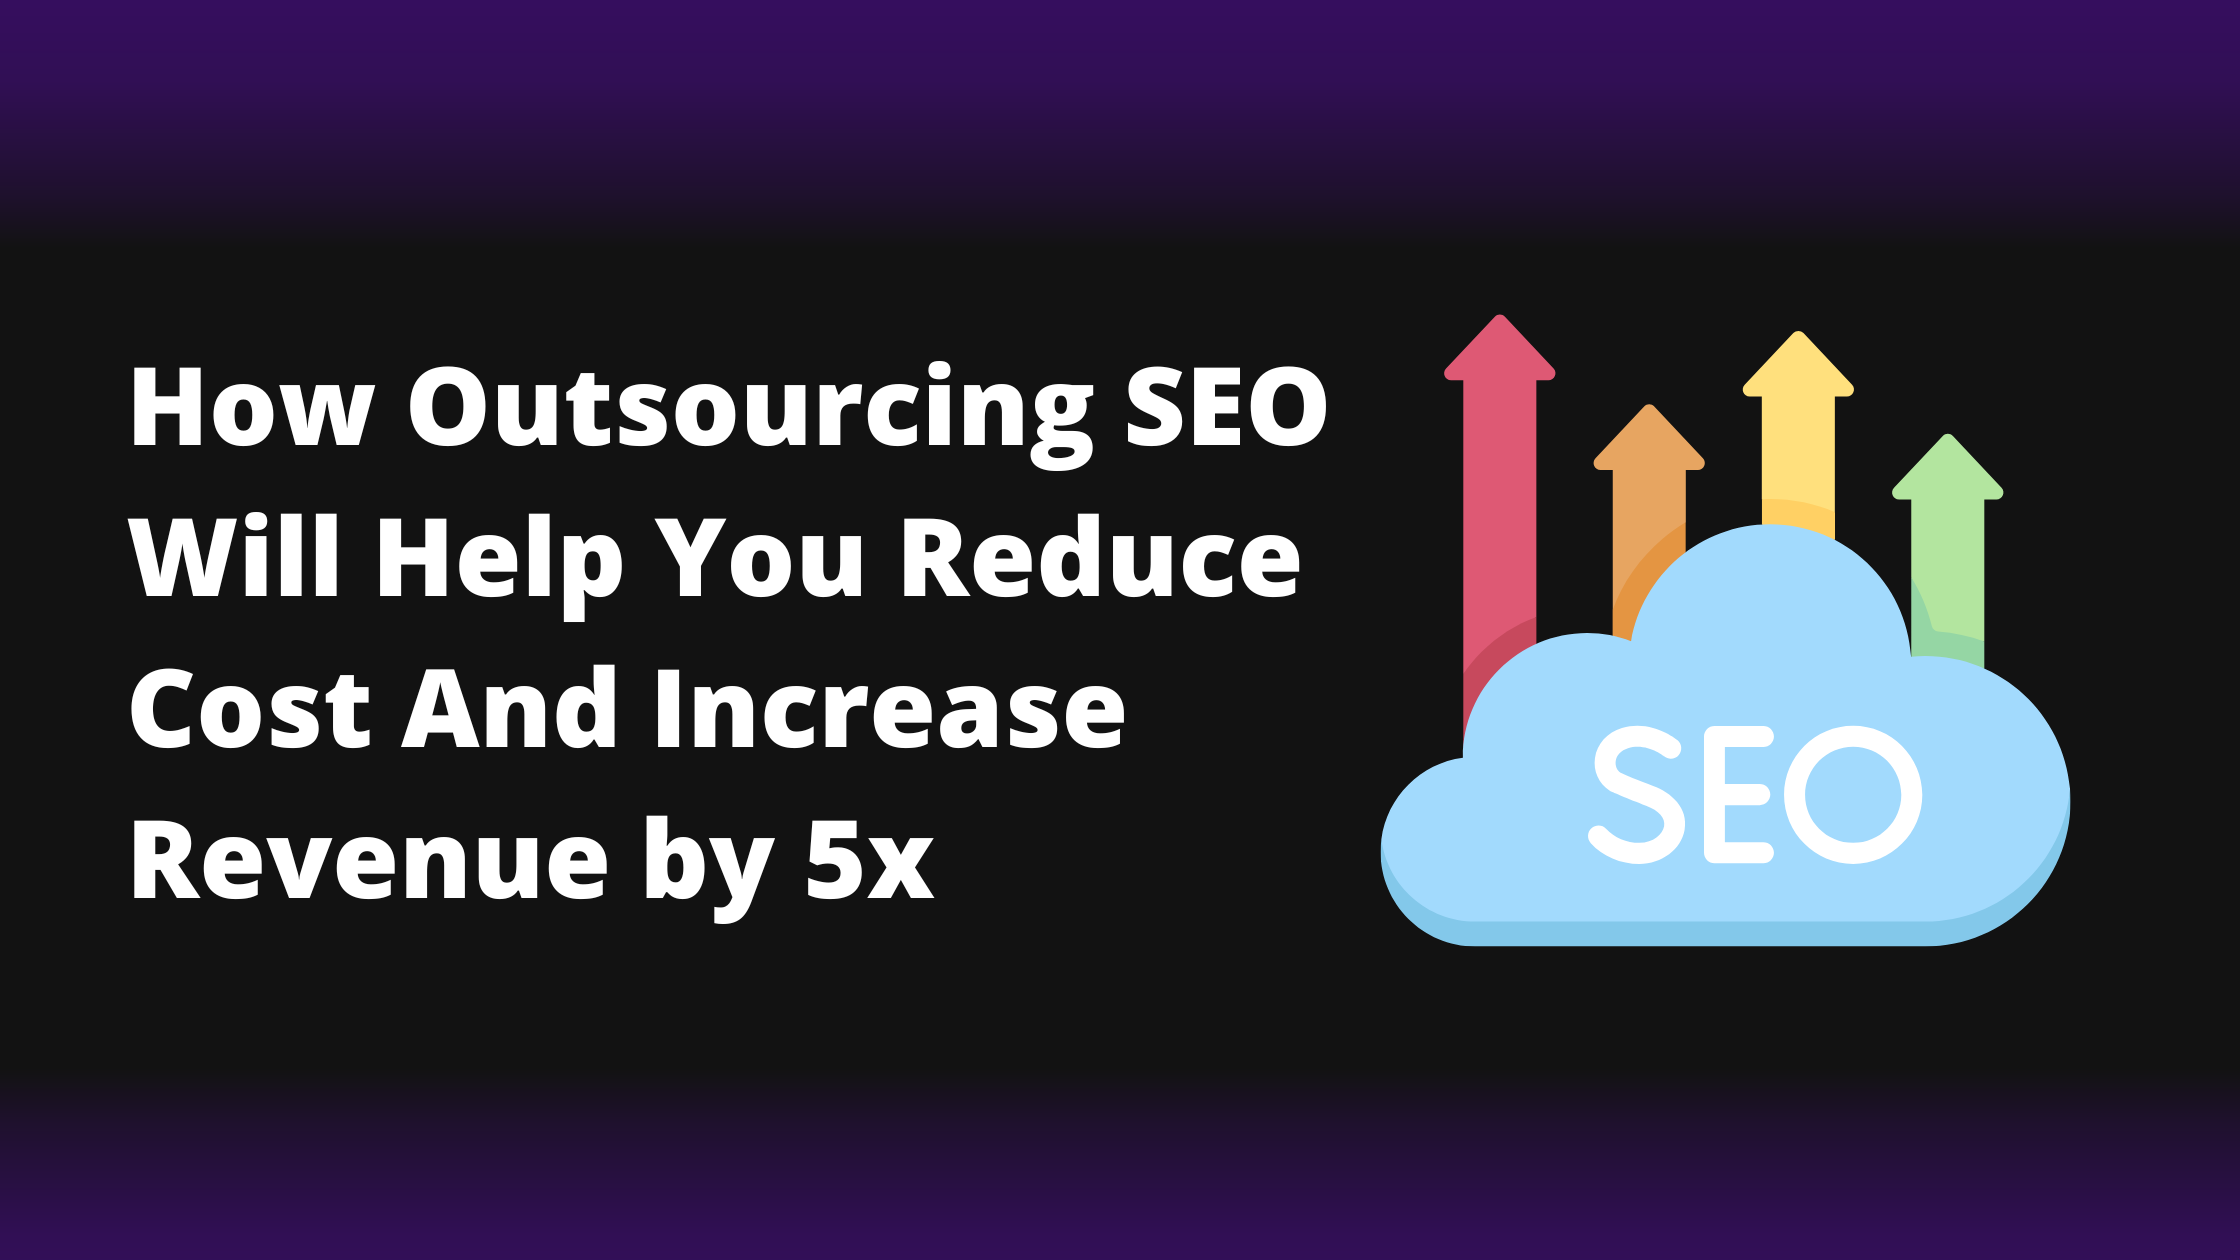 How Outsourcing SEO Will Help You Reduce Cost And Increase Revenue by 5x